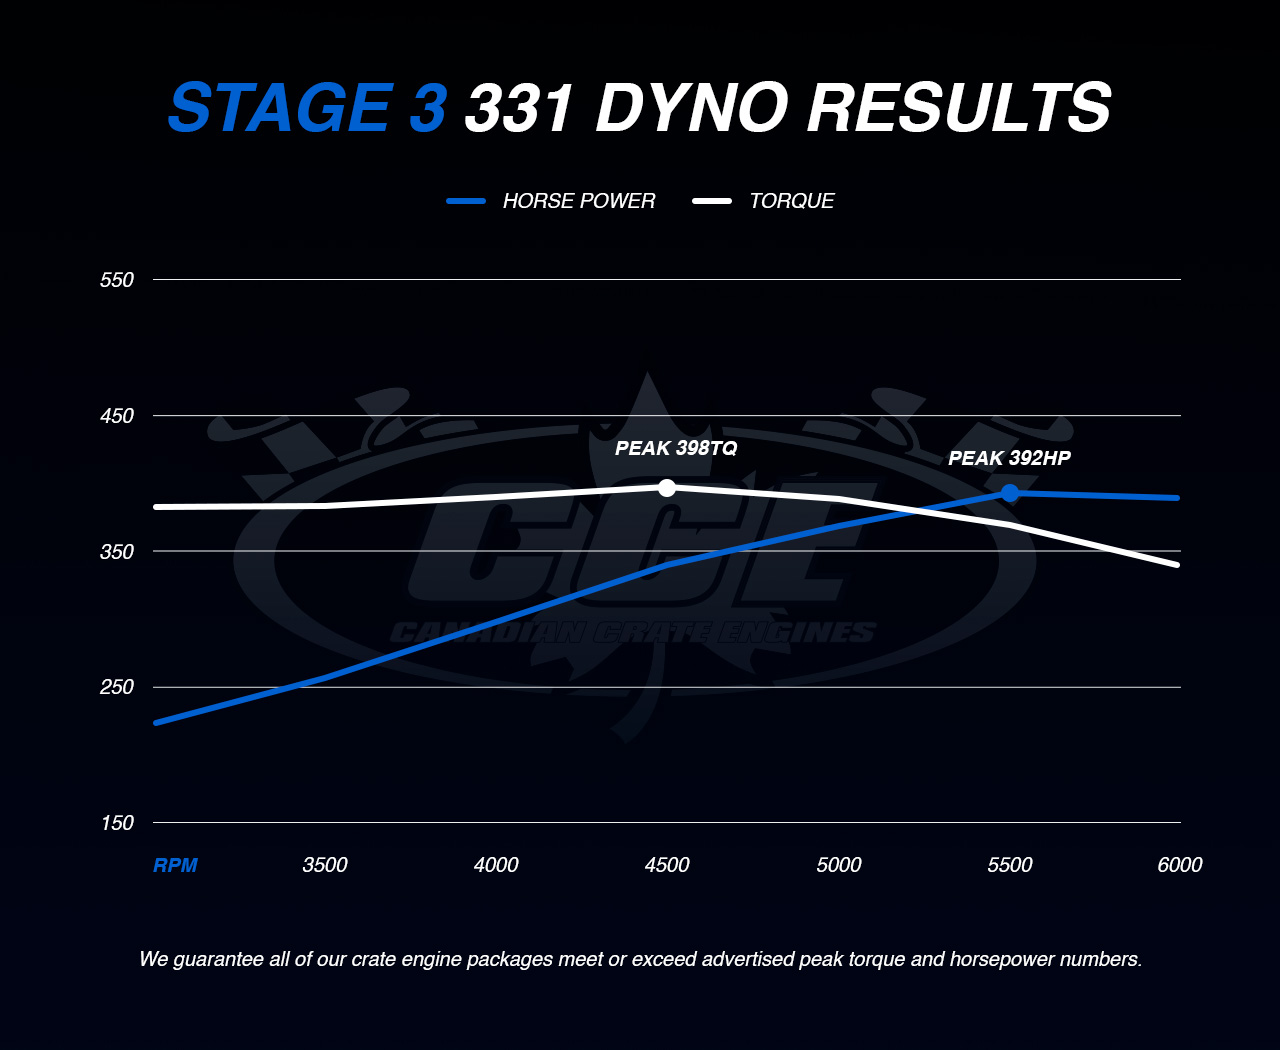 Dyno Graph Results for Ford Stage 3 showing peak torque of 398TQ and peak horsepower of 392HP